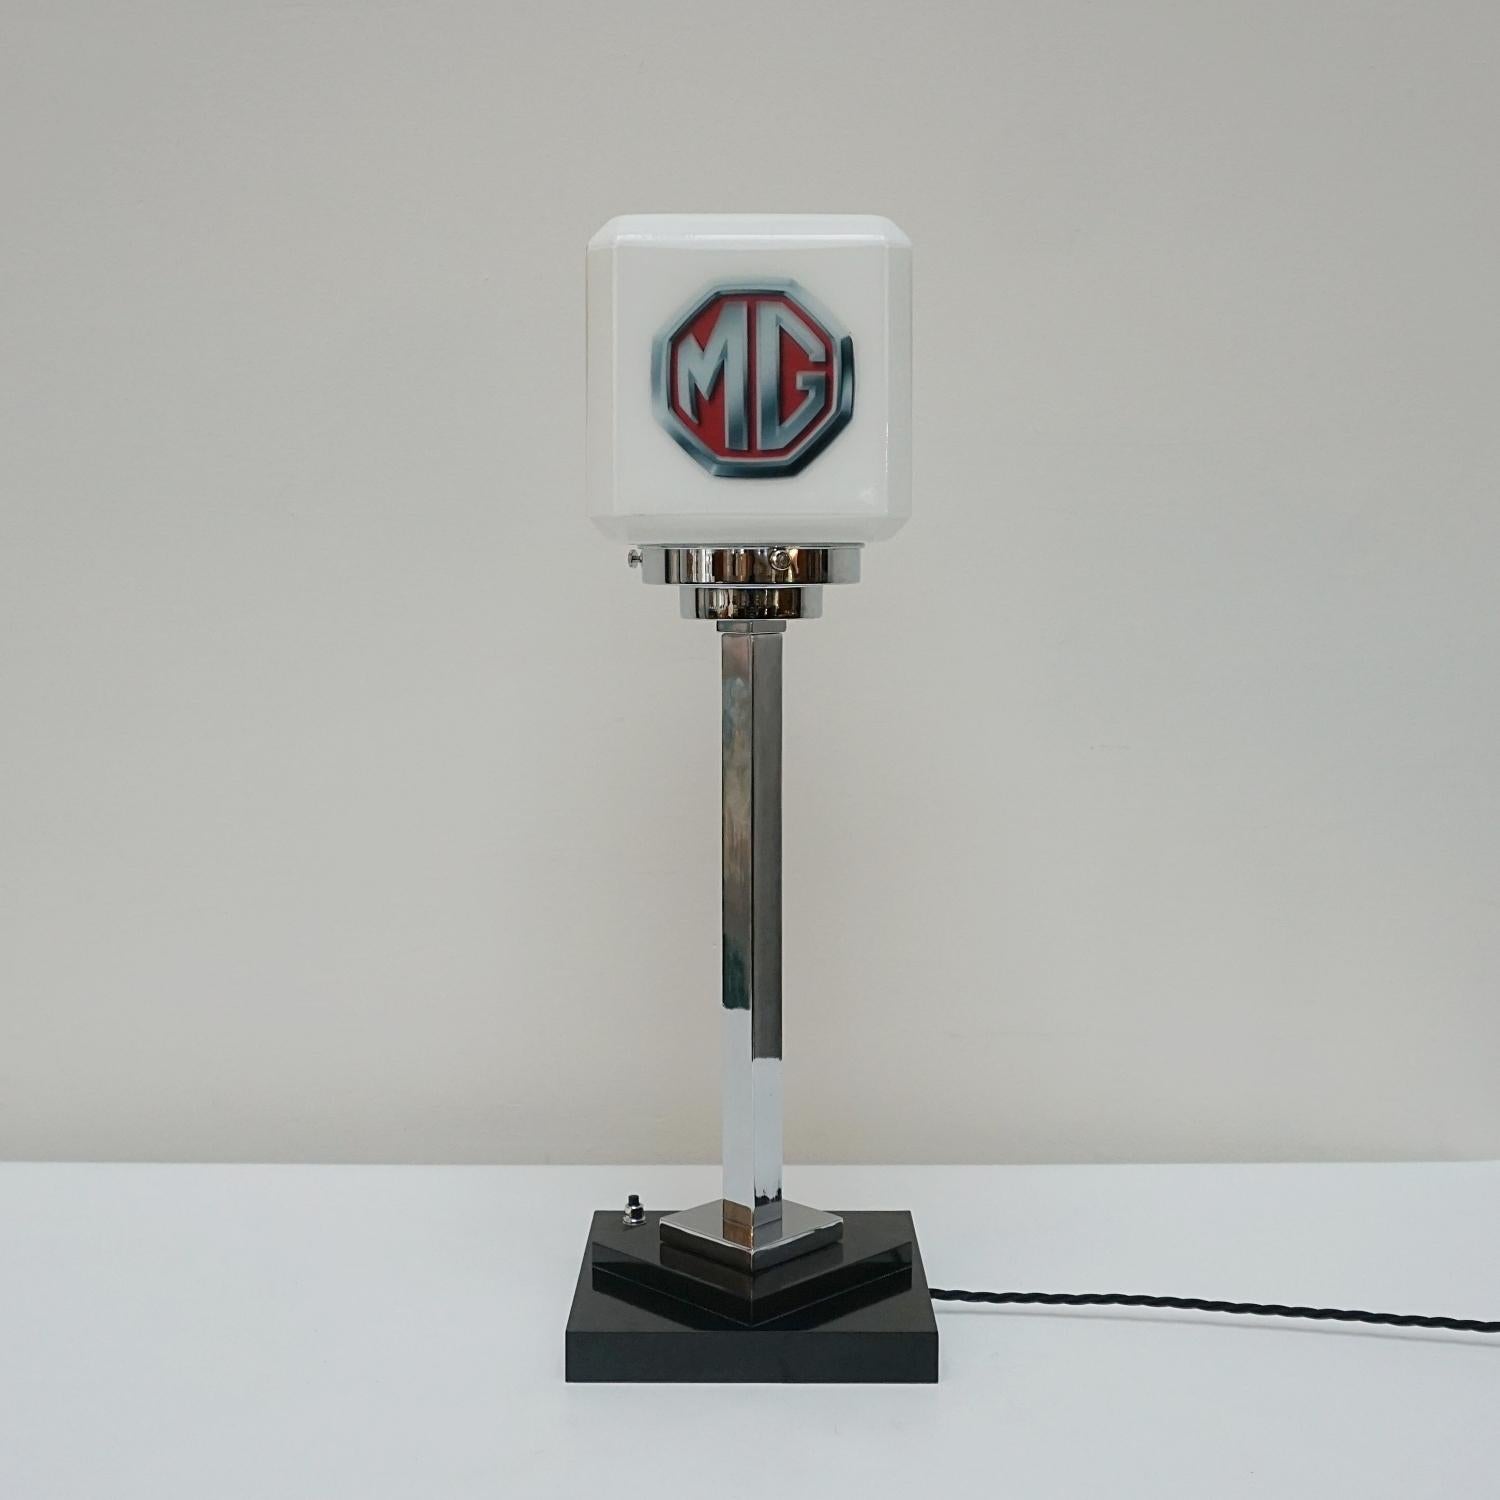 An original tall Art Deco table lamp. Encompassing the emblem of British Car manufactures 'MG' (founded 1920). Raised on a bakelite stepped base with chromed stem. 

Dimensions: H 55cm W 17.5cm D 17.5cm

Origin: English

Item Number: J310

All of